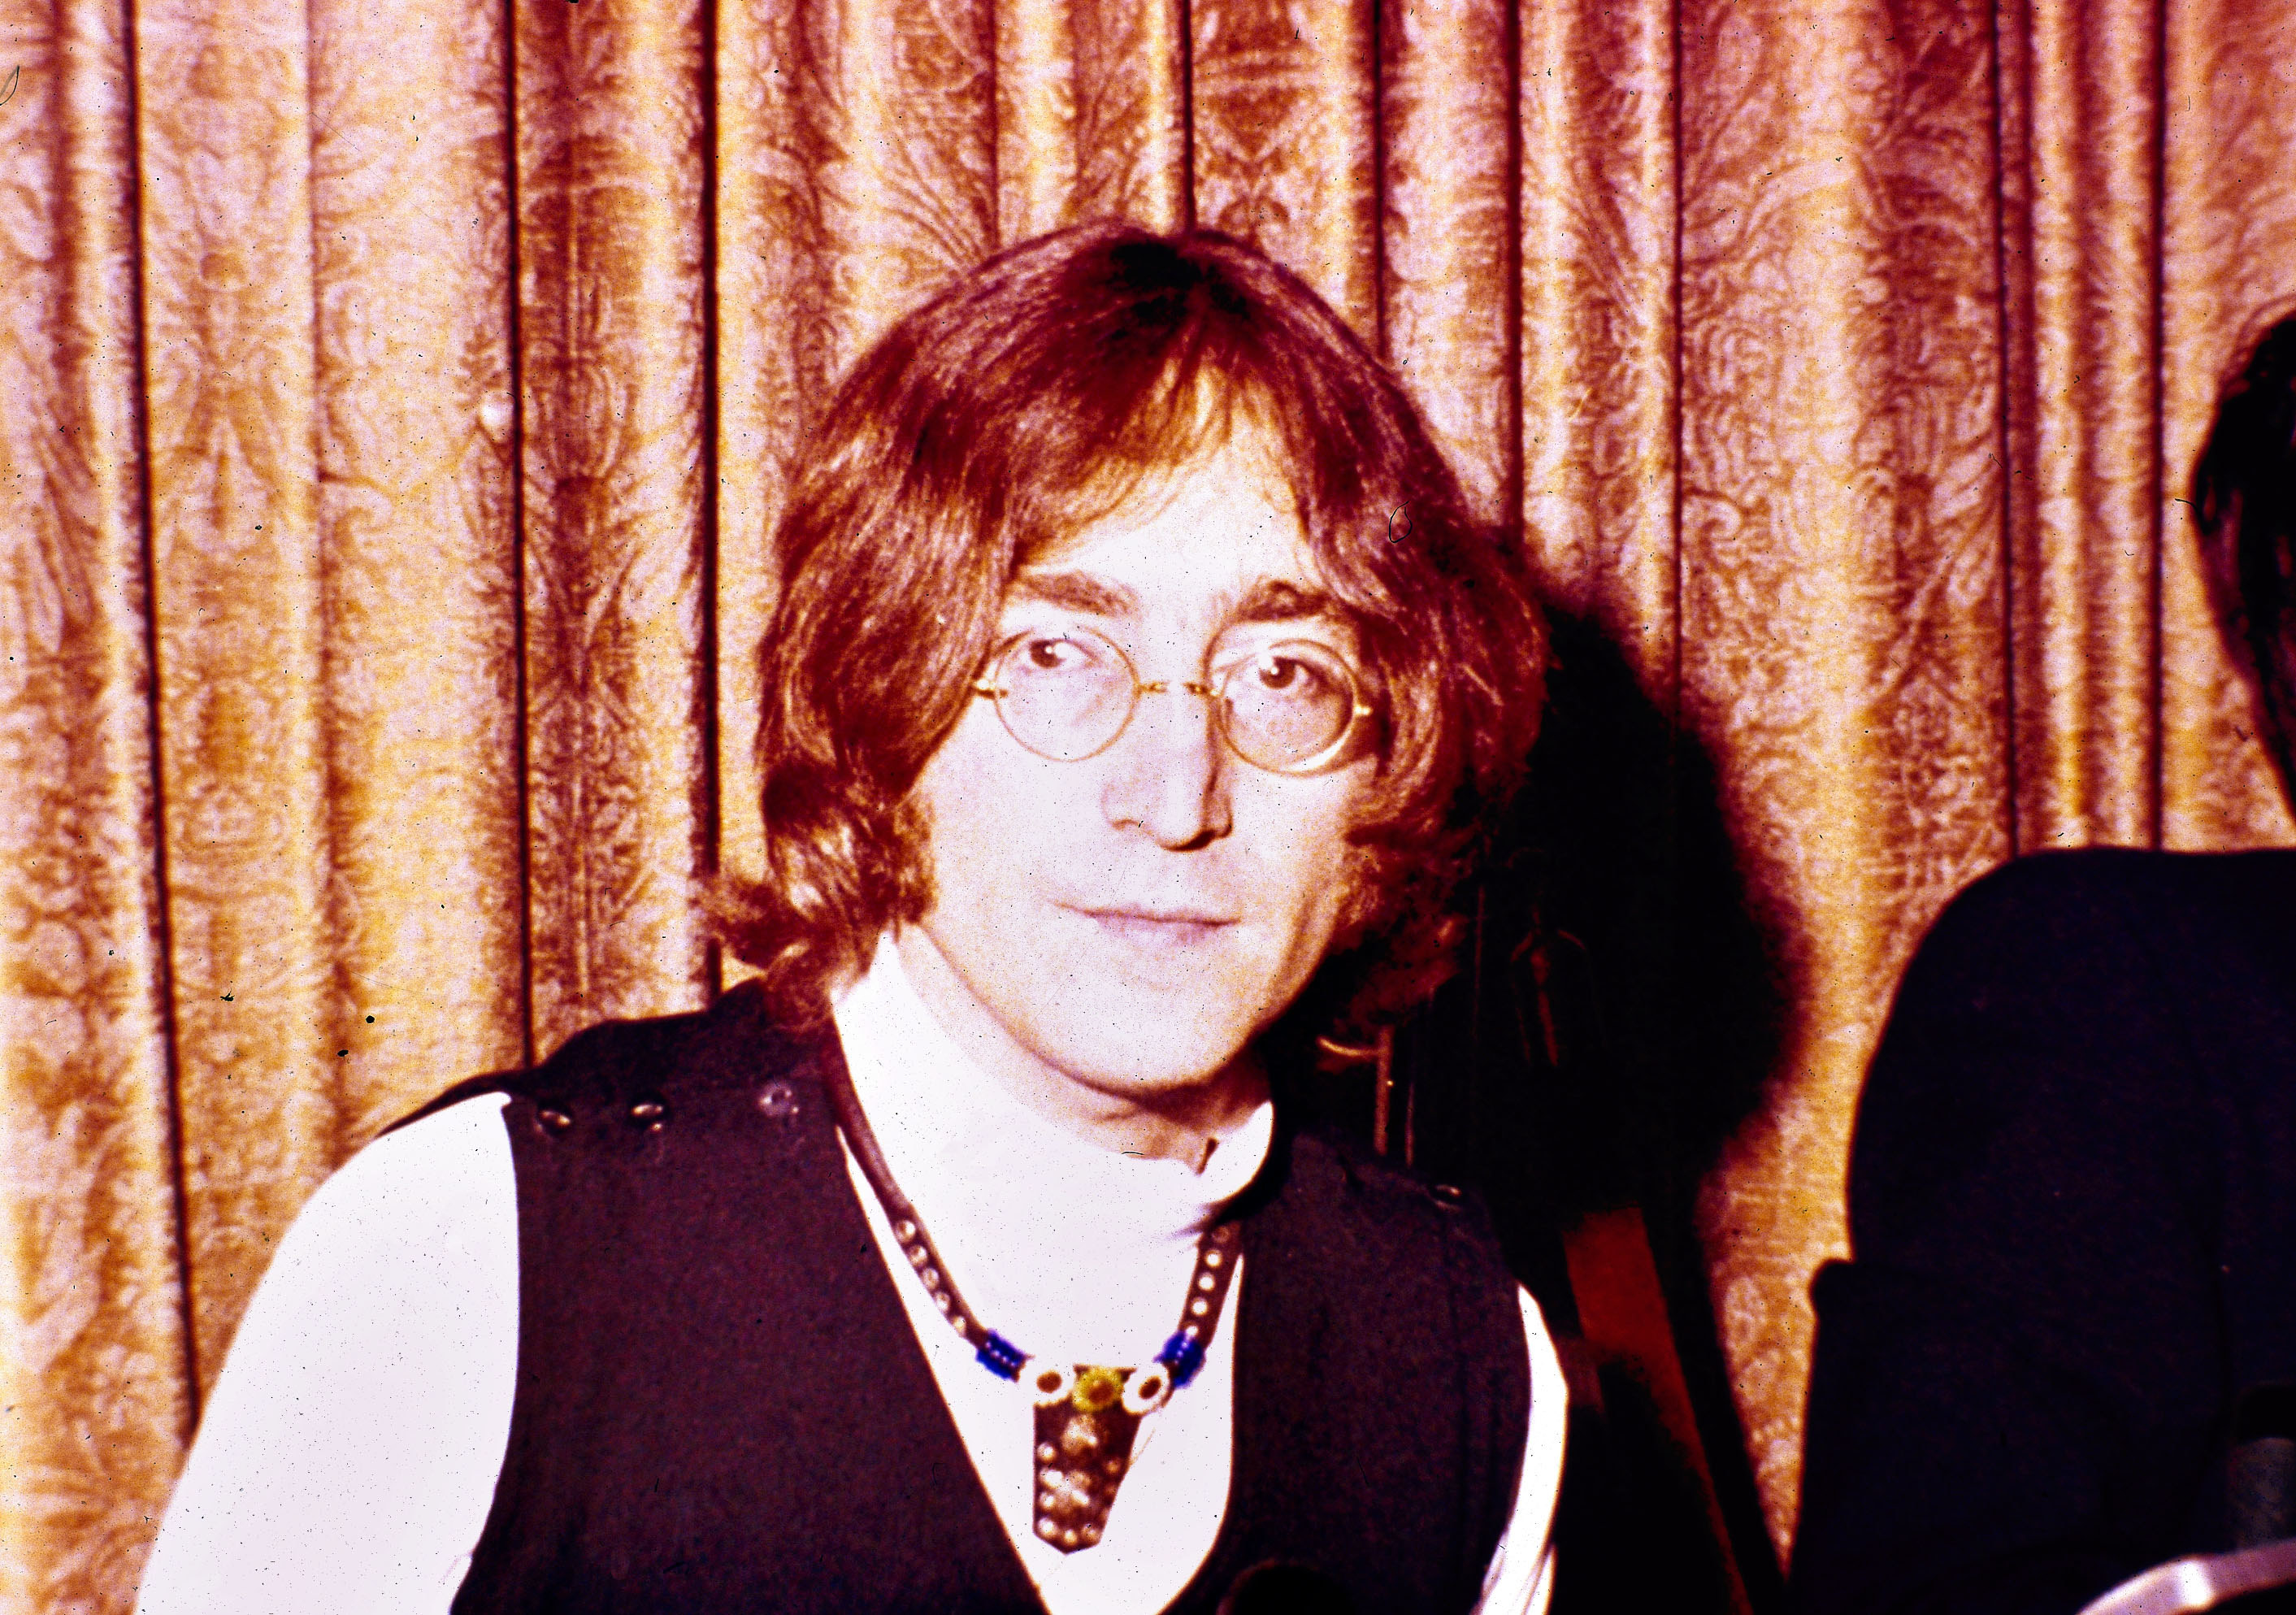 John Lennon in front of a curtain with long hair his signature glasses and a necklace